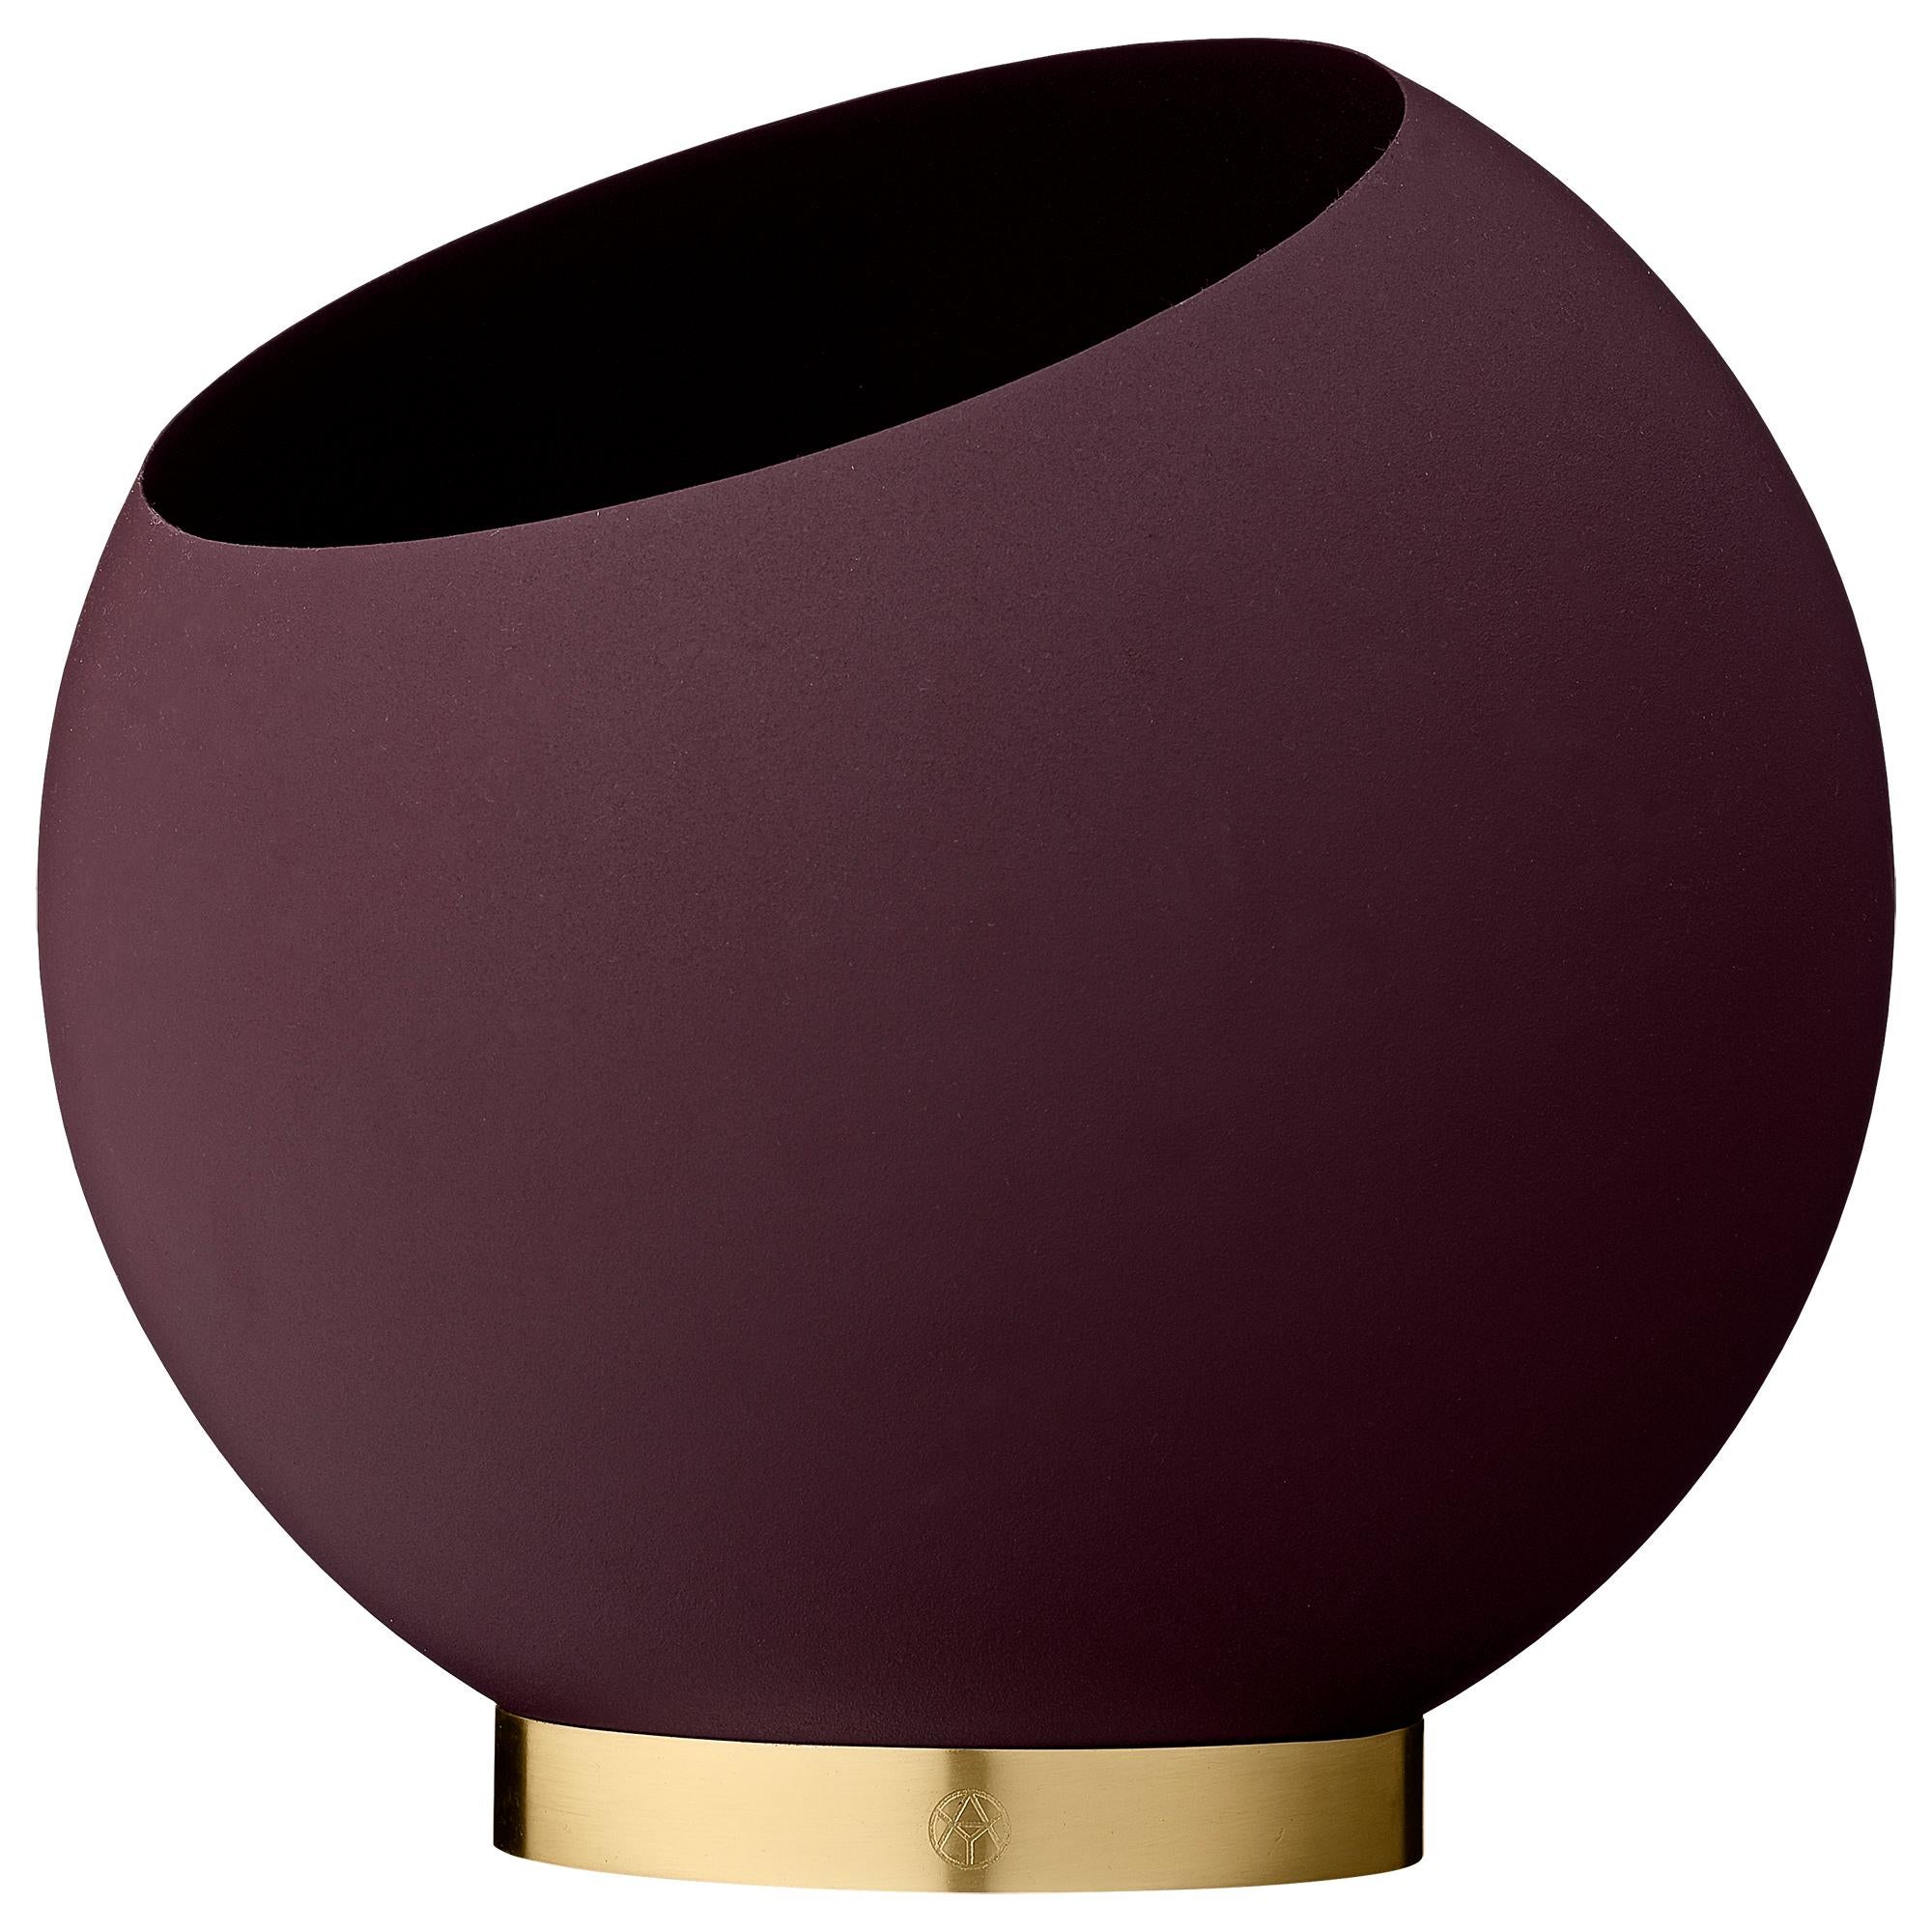 Medium Bordeaux minimalist flower pot
Dimensions: Diameter 37 x H 32.3 cm 
Materials: Matte-coated Steel and Polished Iron. 
Also available in black and in sizes small, large and extra large. 

A very popular design has been renewed and